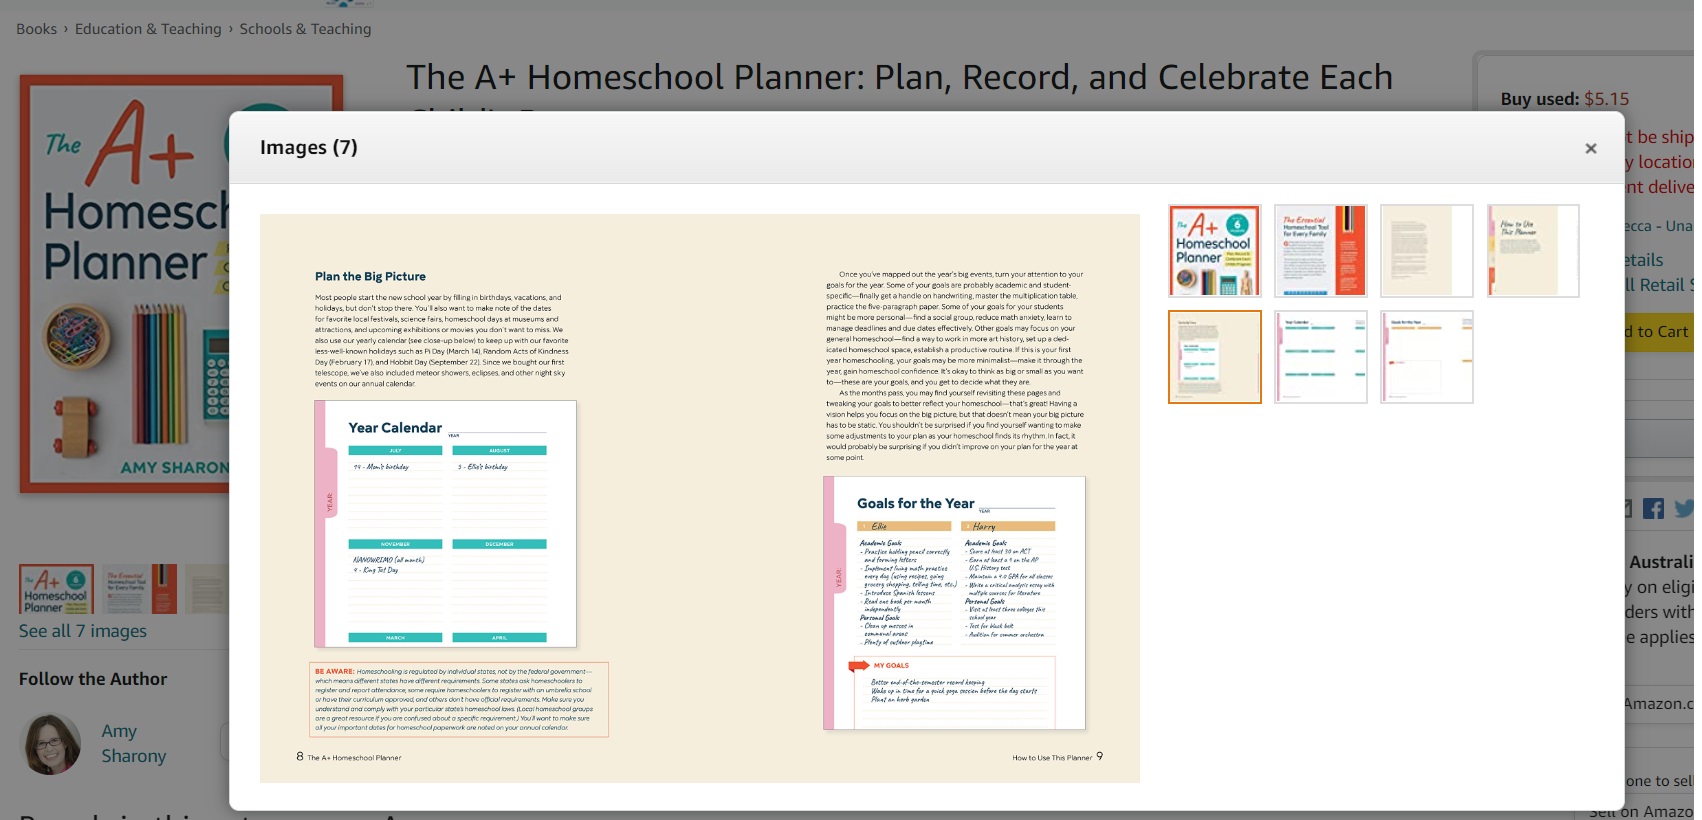 The A+ Homeschool Planner to Plan Record and Celebrate Each Child's Progress